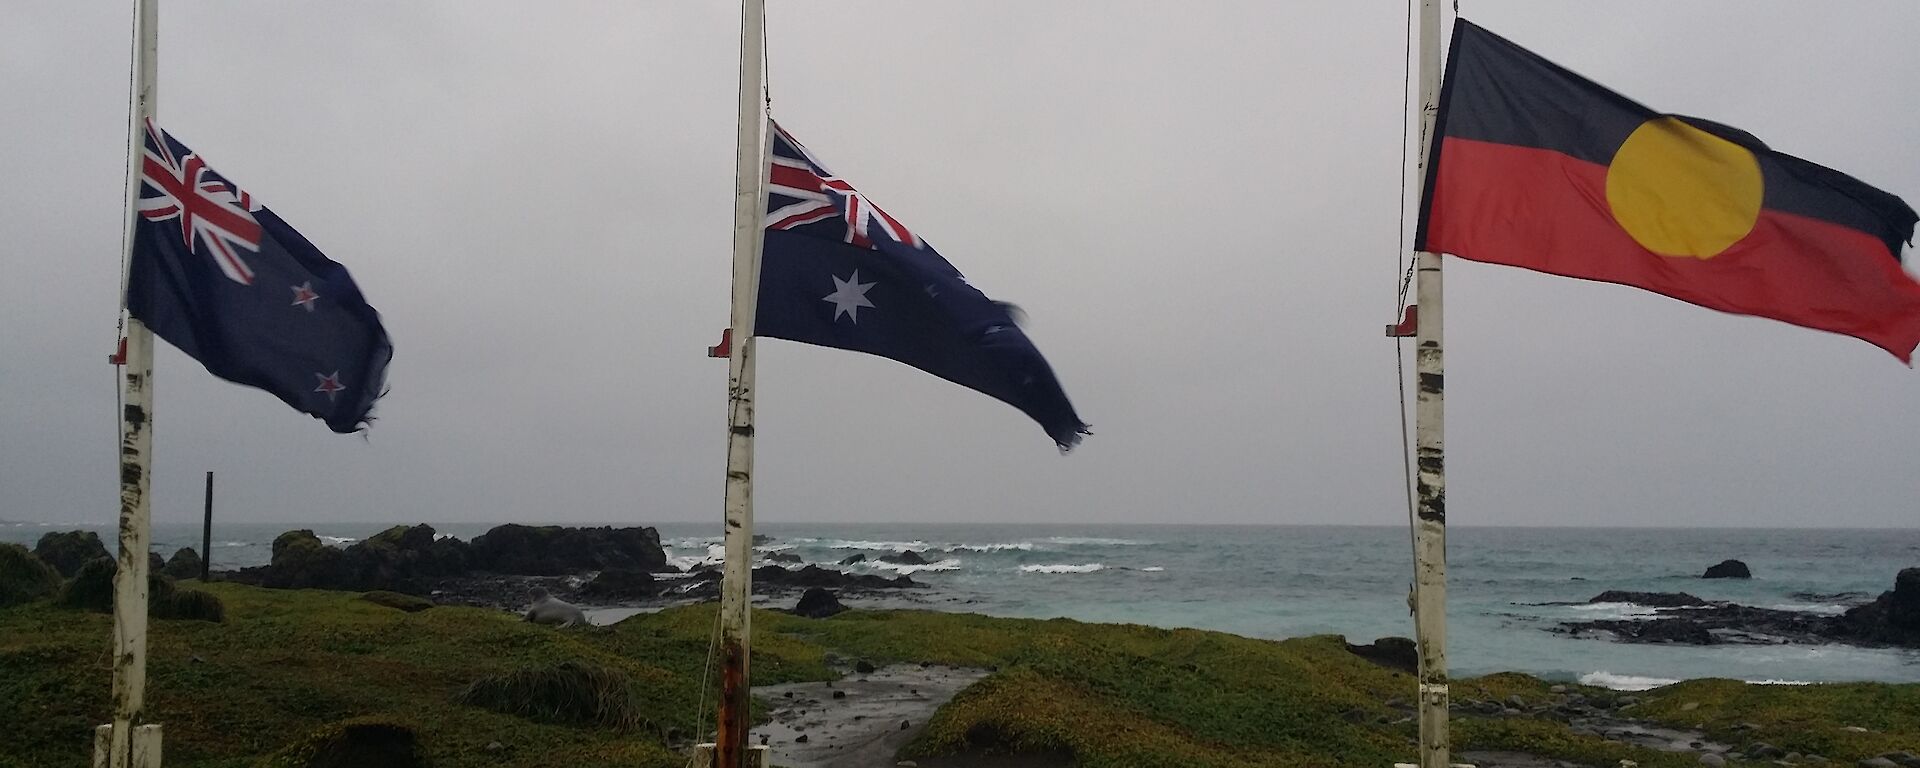 The Australian, New Zealand, and aboriginal flag are seen at half mast